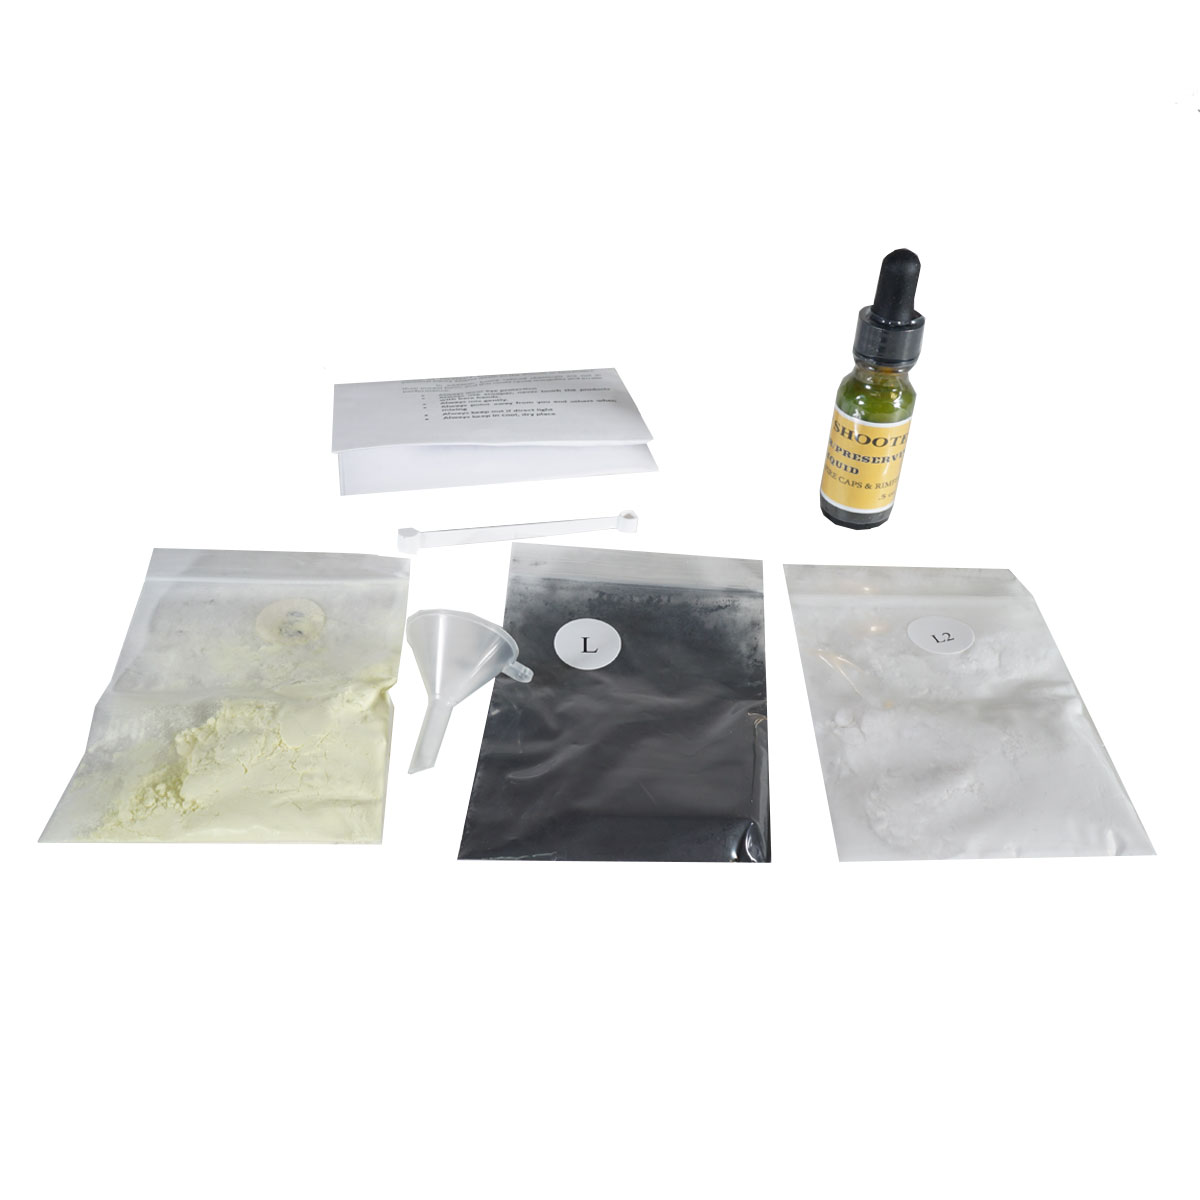 Sharpshooter LLC 2.0 Prime All Primer Compound Kit for Centerfire Primers, Includes Instructions